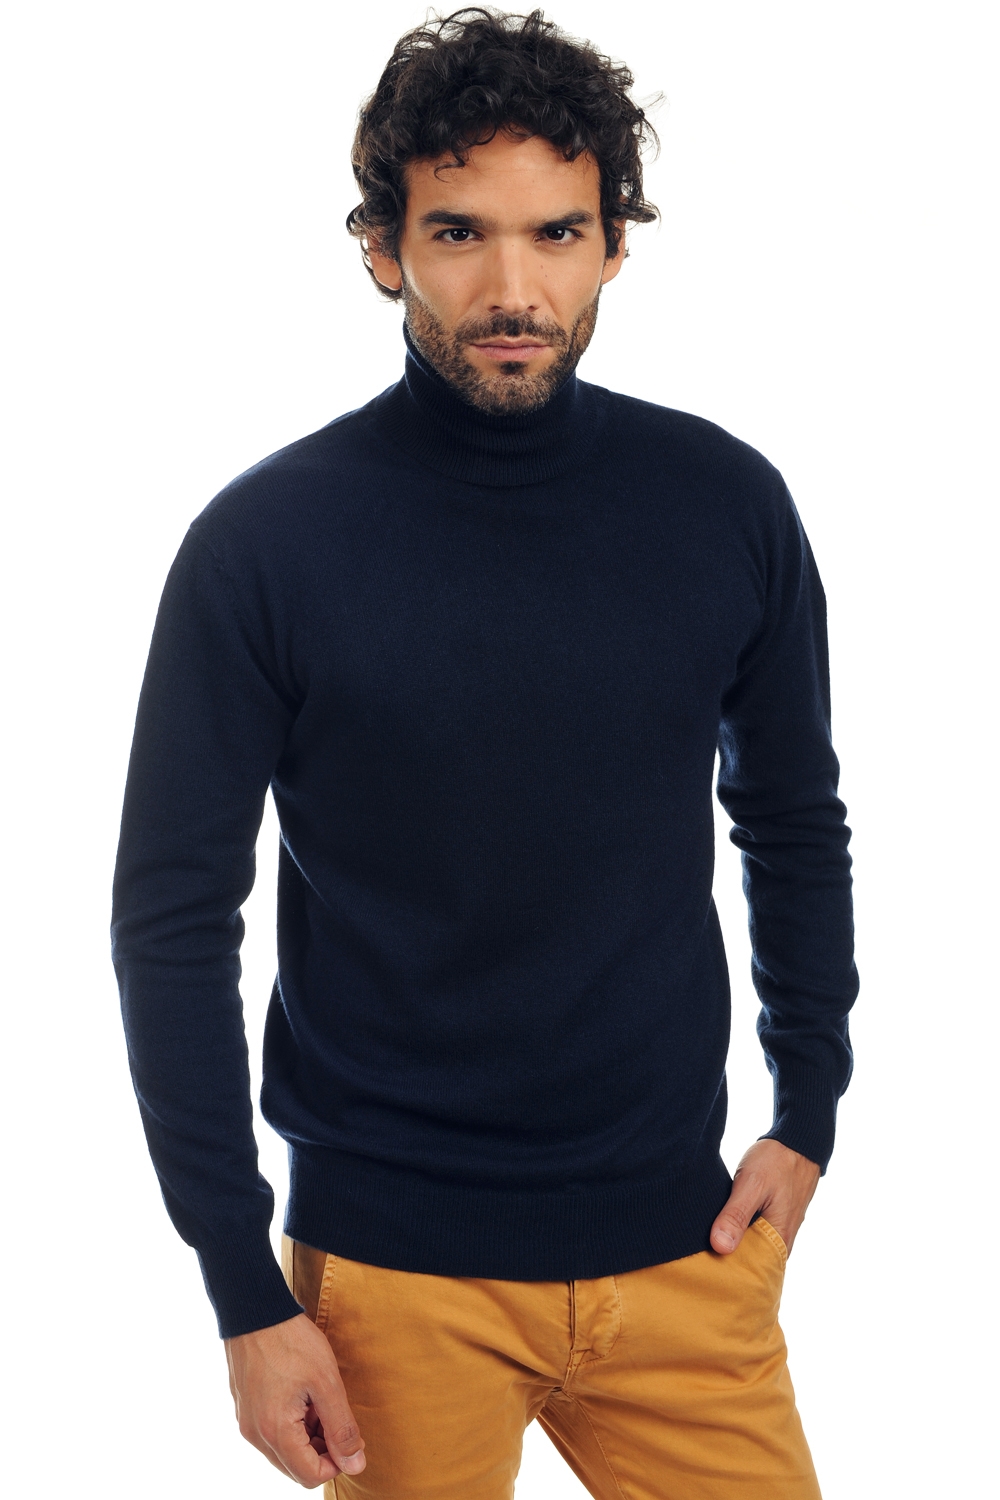 Cachemire pull homme col roule preston marine fonce 3xl